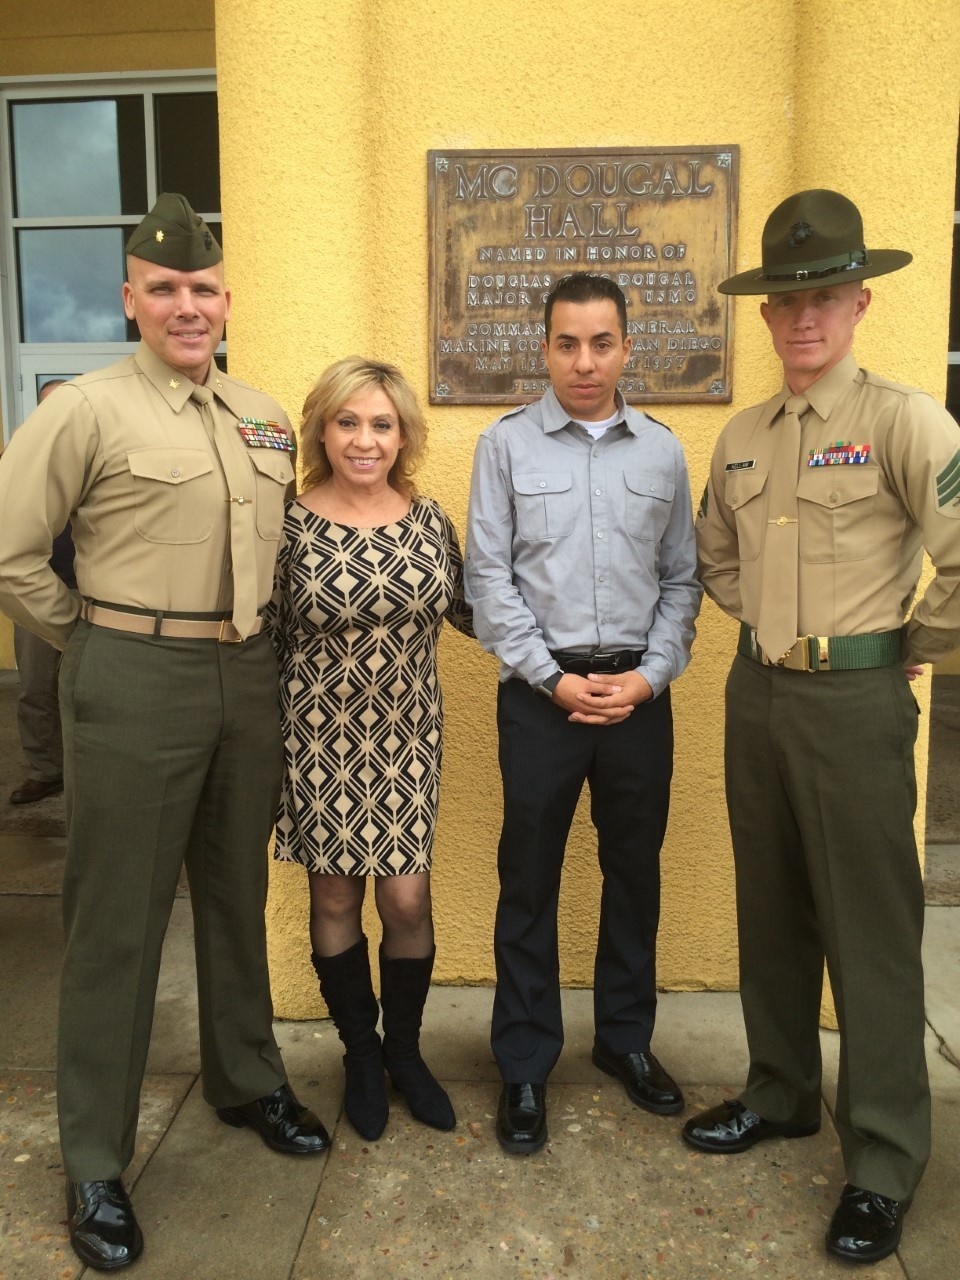 Ramsey Family legacy: 3rd generation joins Marine Corps